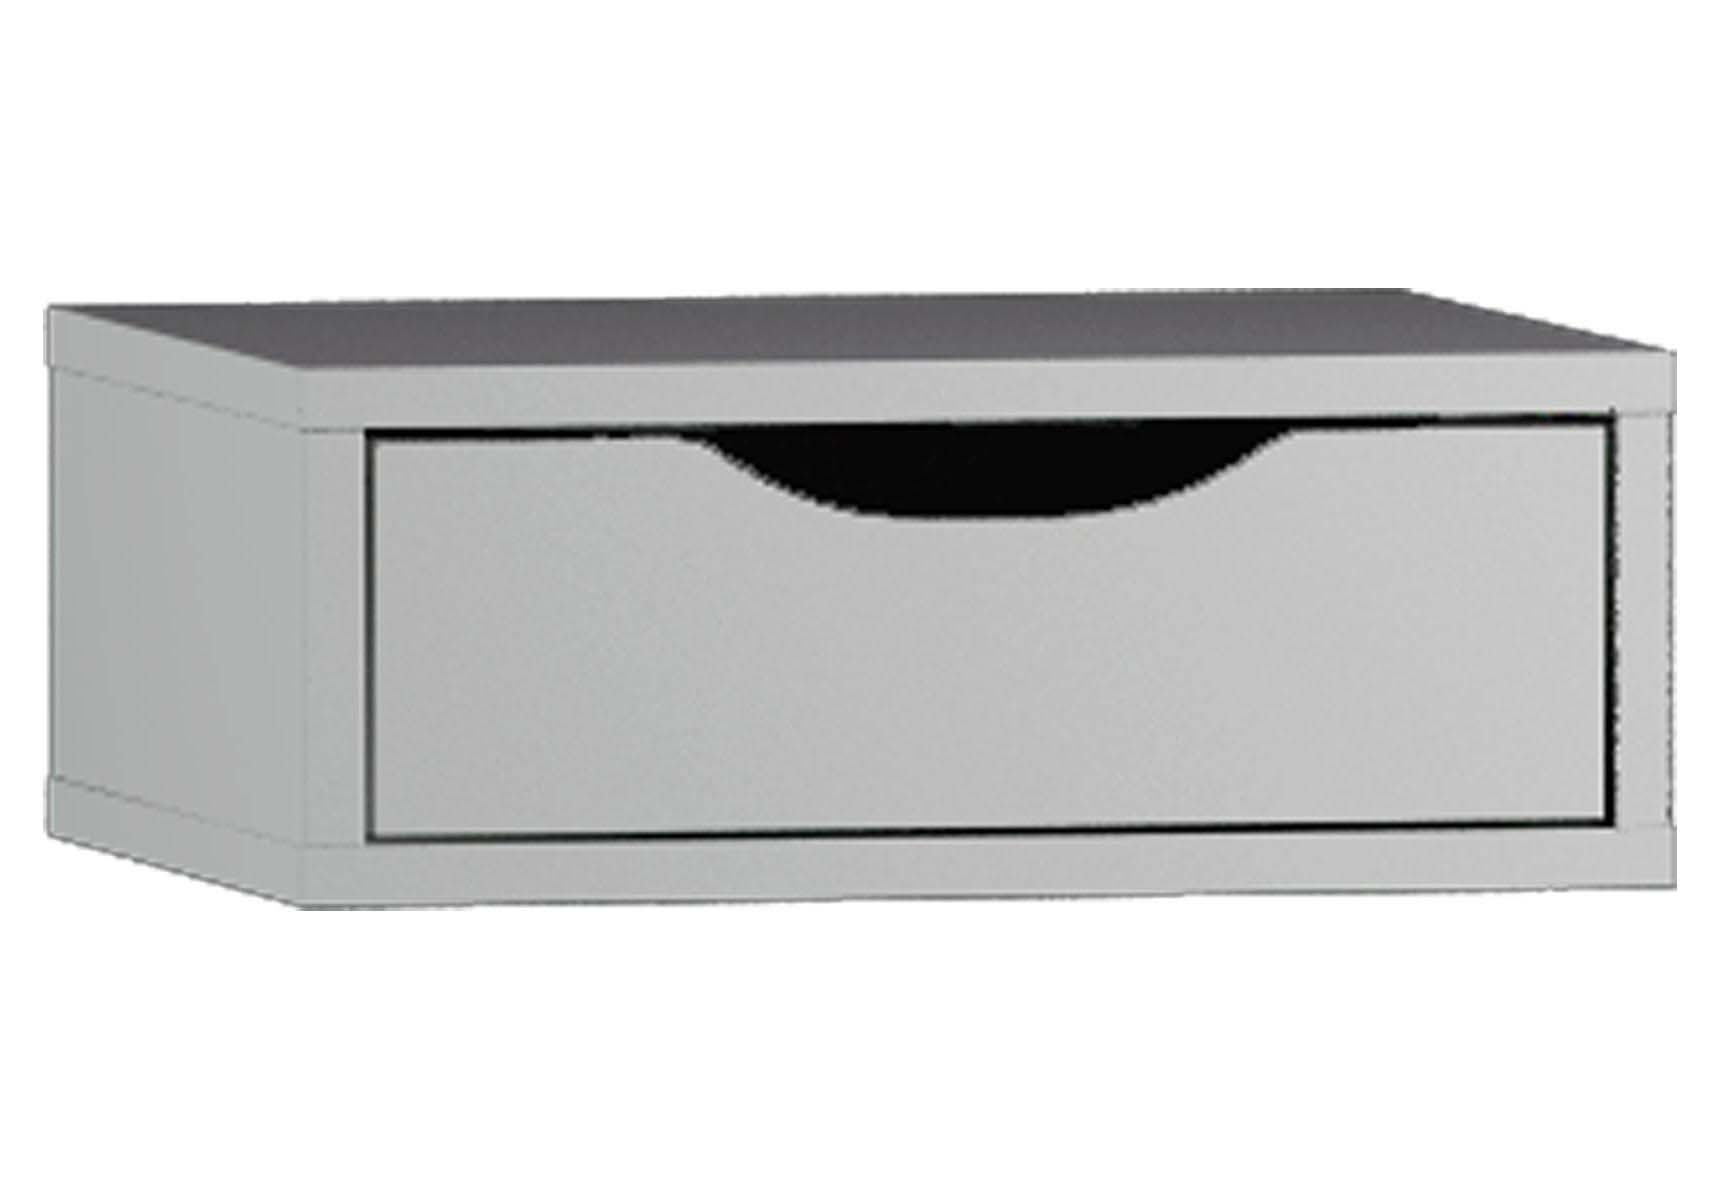 System Fit Tall Unit Accessory- Make-Up Drawer